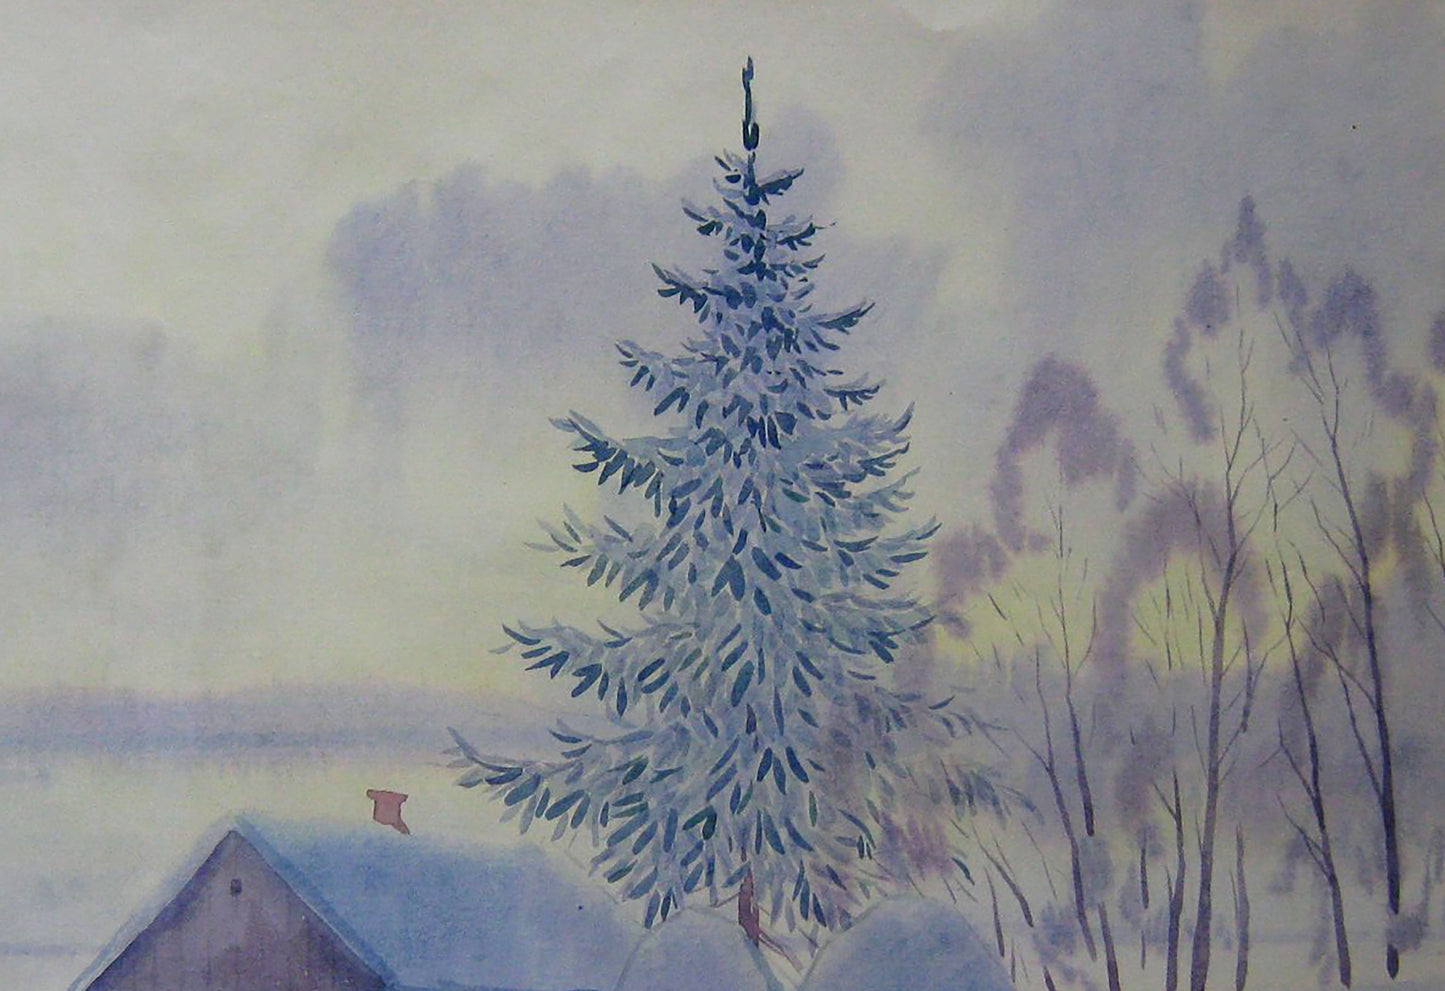 Watercolor painting depicting a "January Morning" by Valery Savenets